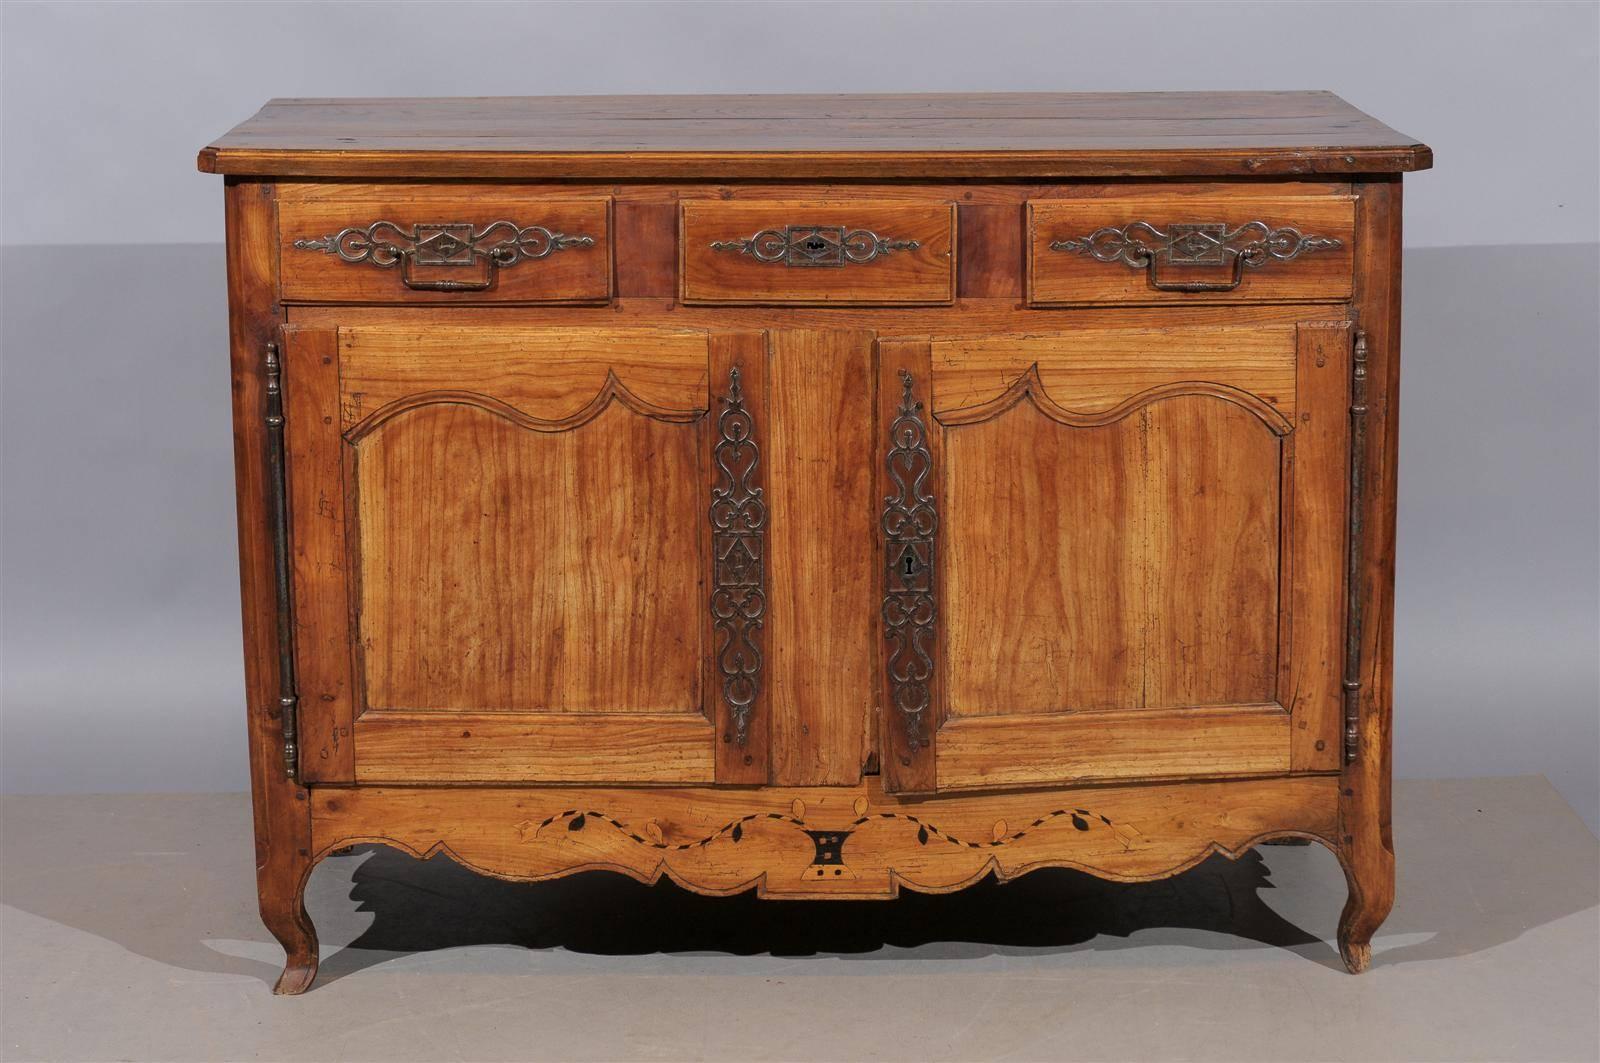 A French Louis XV style fruitwood buffet with marquetry inlay on apron, circa 1820.